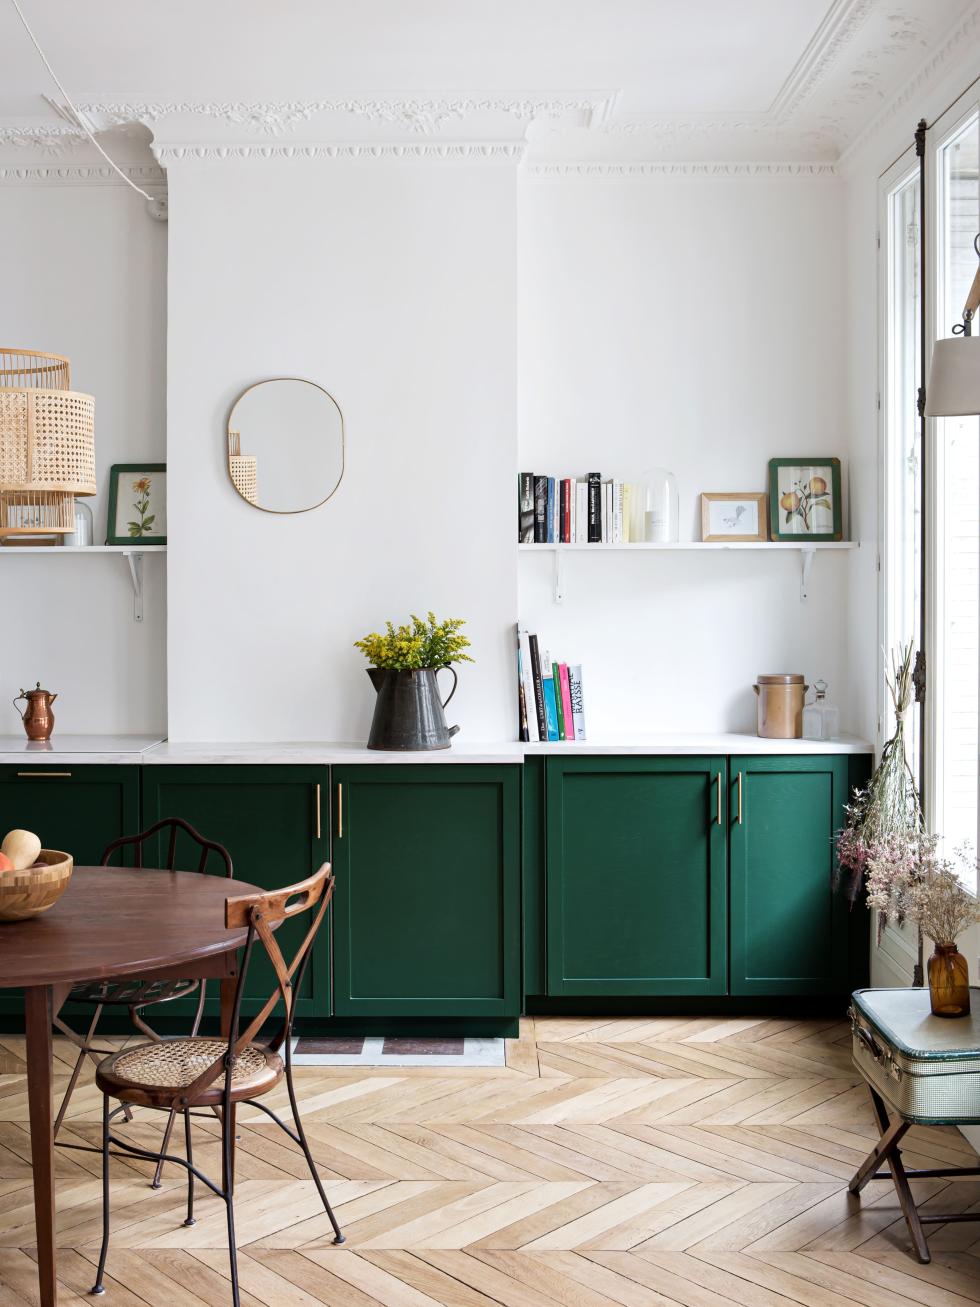 SHAKER KITCHEN IN GREEN 02 - SOMBRE FOREST